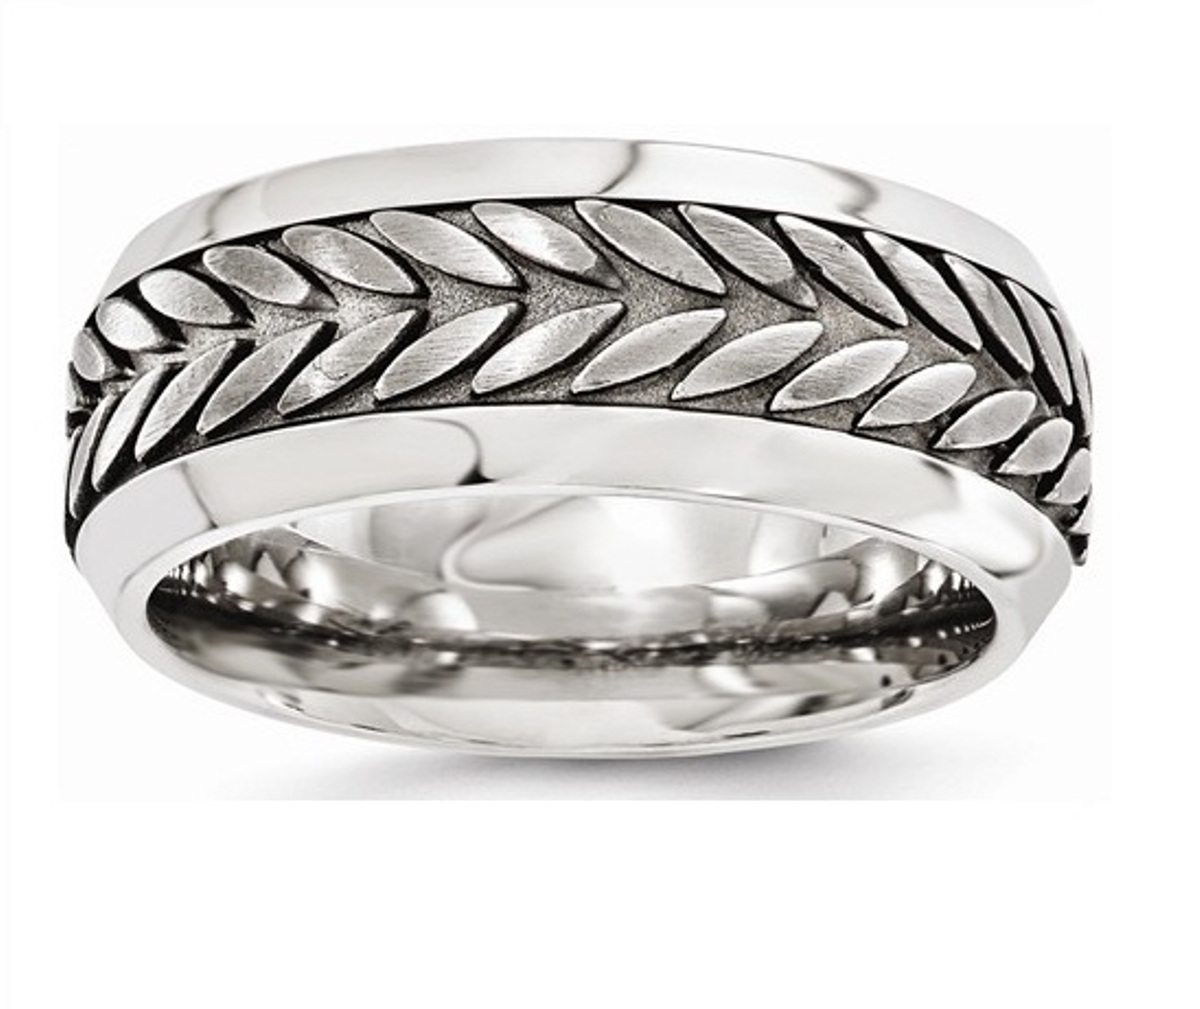 Edward Mirell Titanium and Stainless Steel Casted Beveled 9mm Wedding Bands